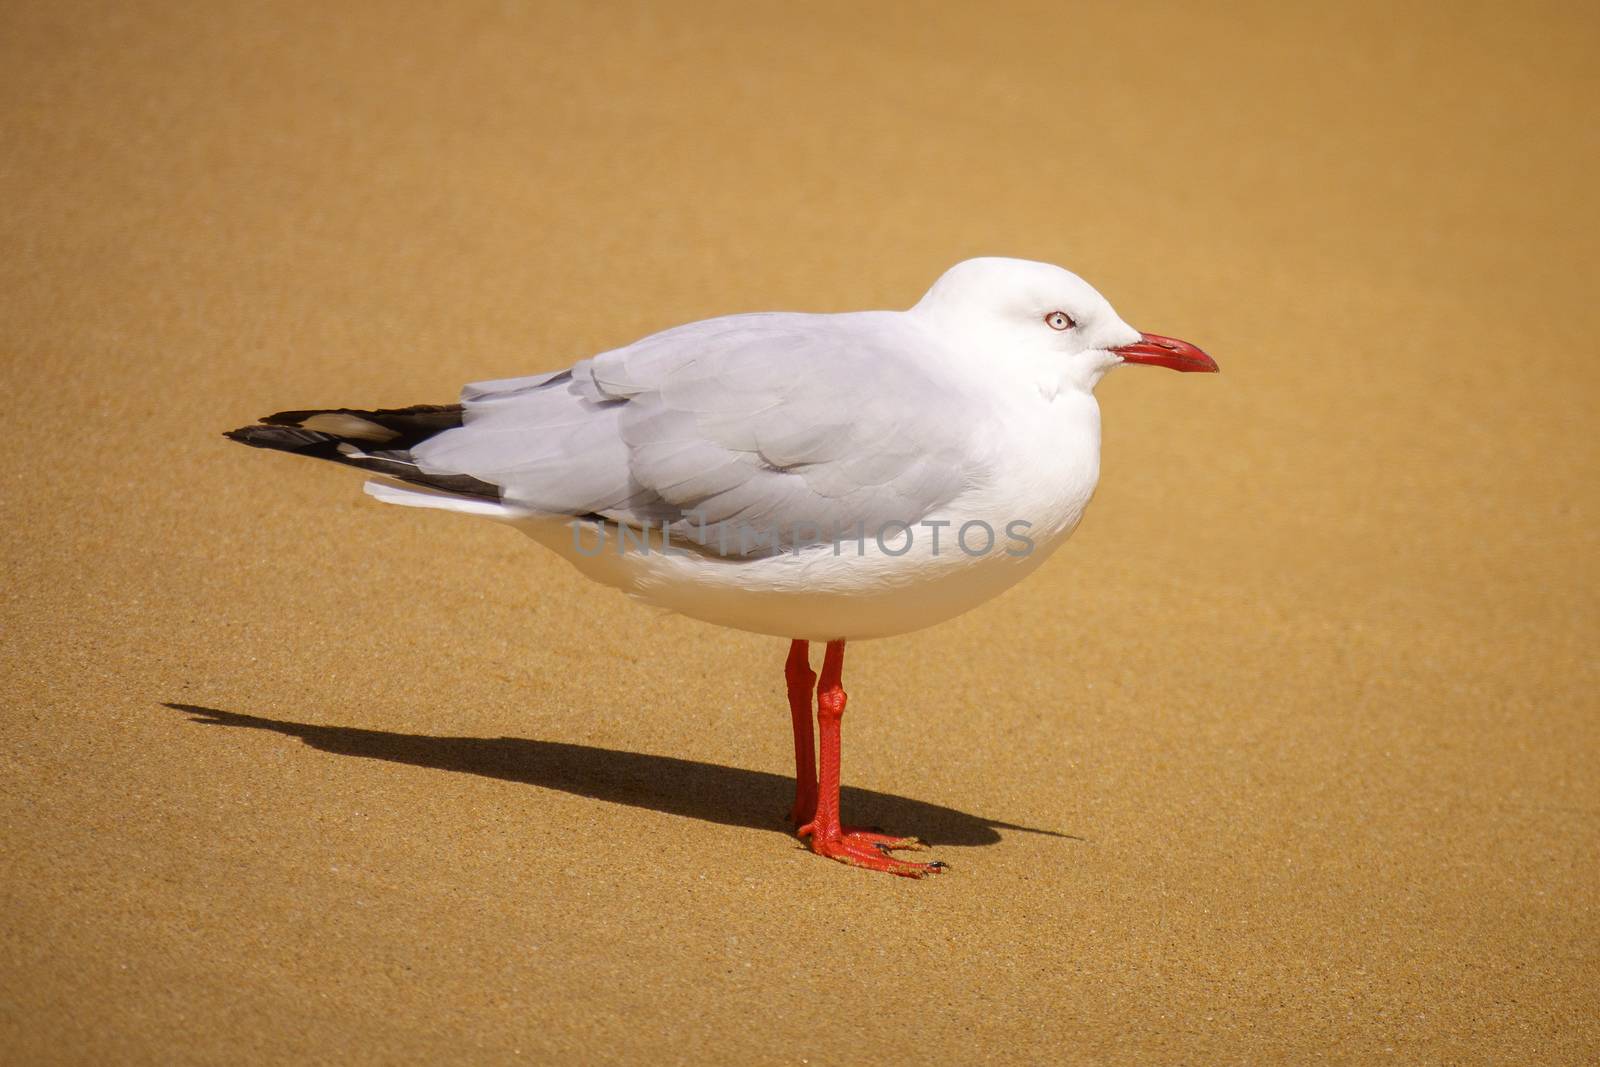 An image of a beautiful seagull at the sandy beach